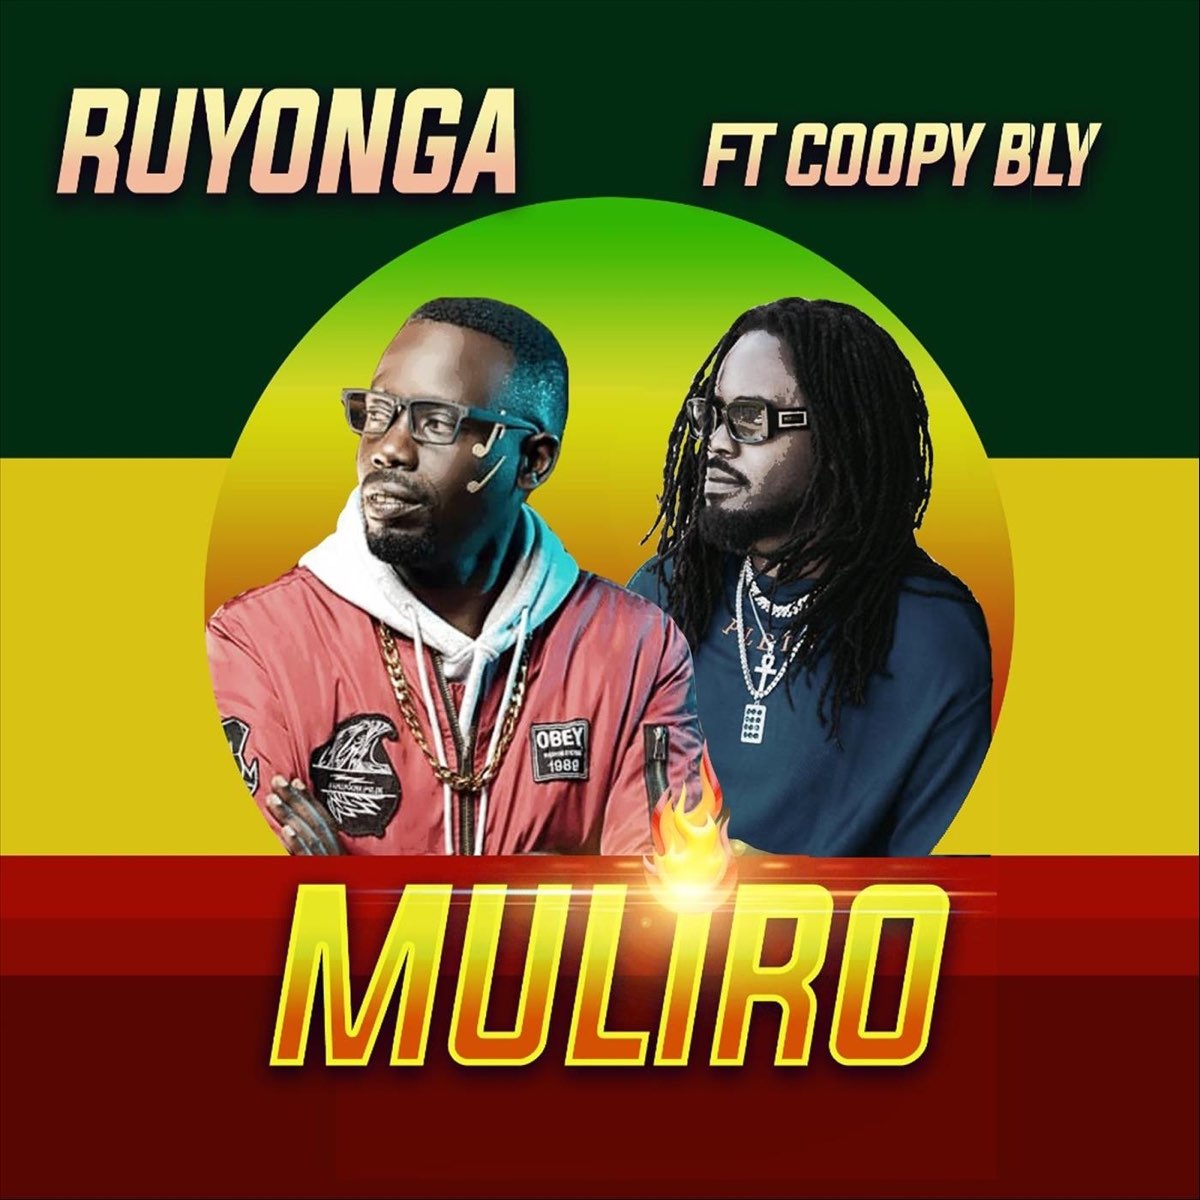 Coopy Bly) - Single by Ruyonga on Apple Music.